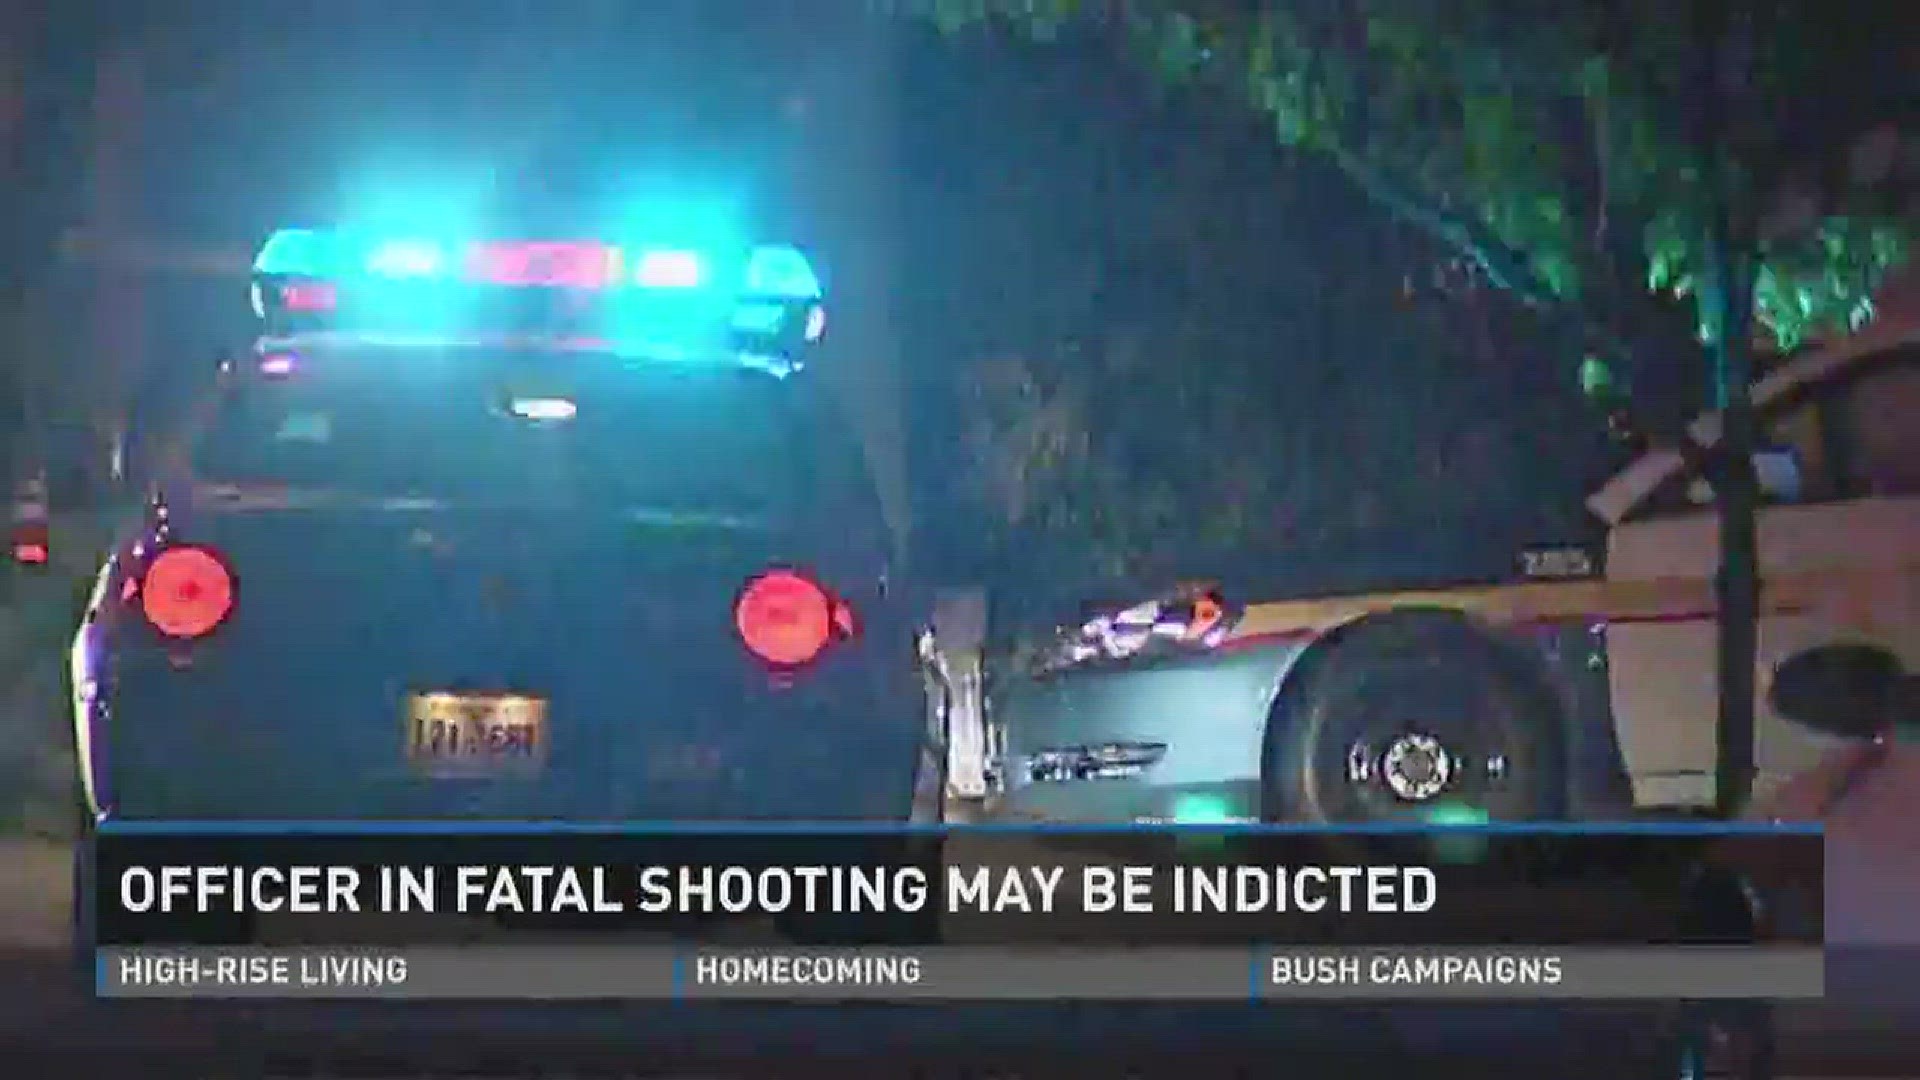 Officer in fatal shooting may be indicted